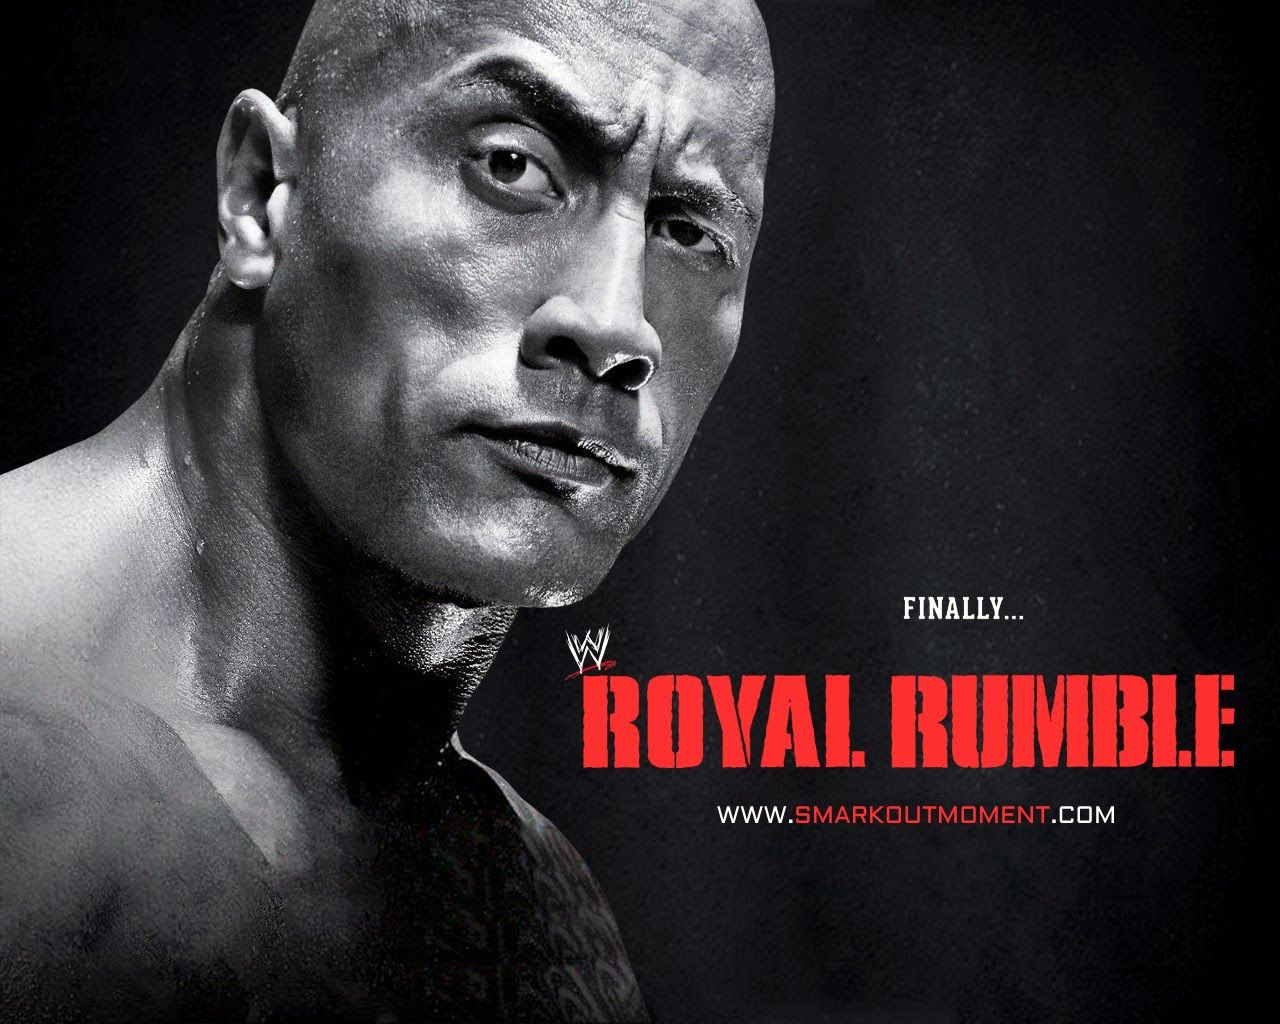 Win a Copy of Royal Rumble 2013 on DVD or Blu Ray. Smark Out Moment